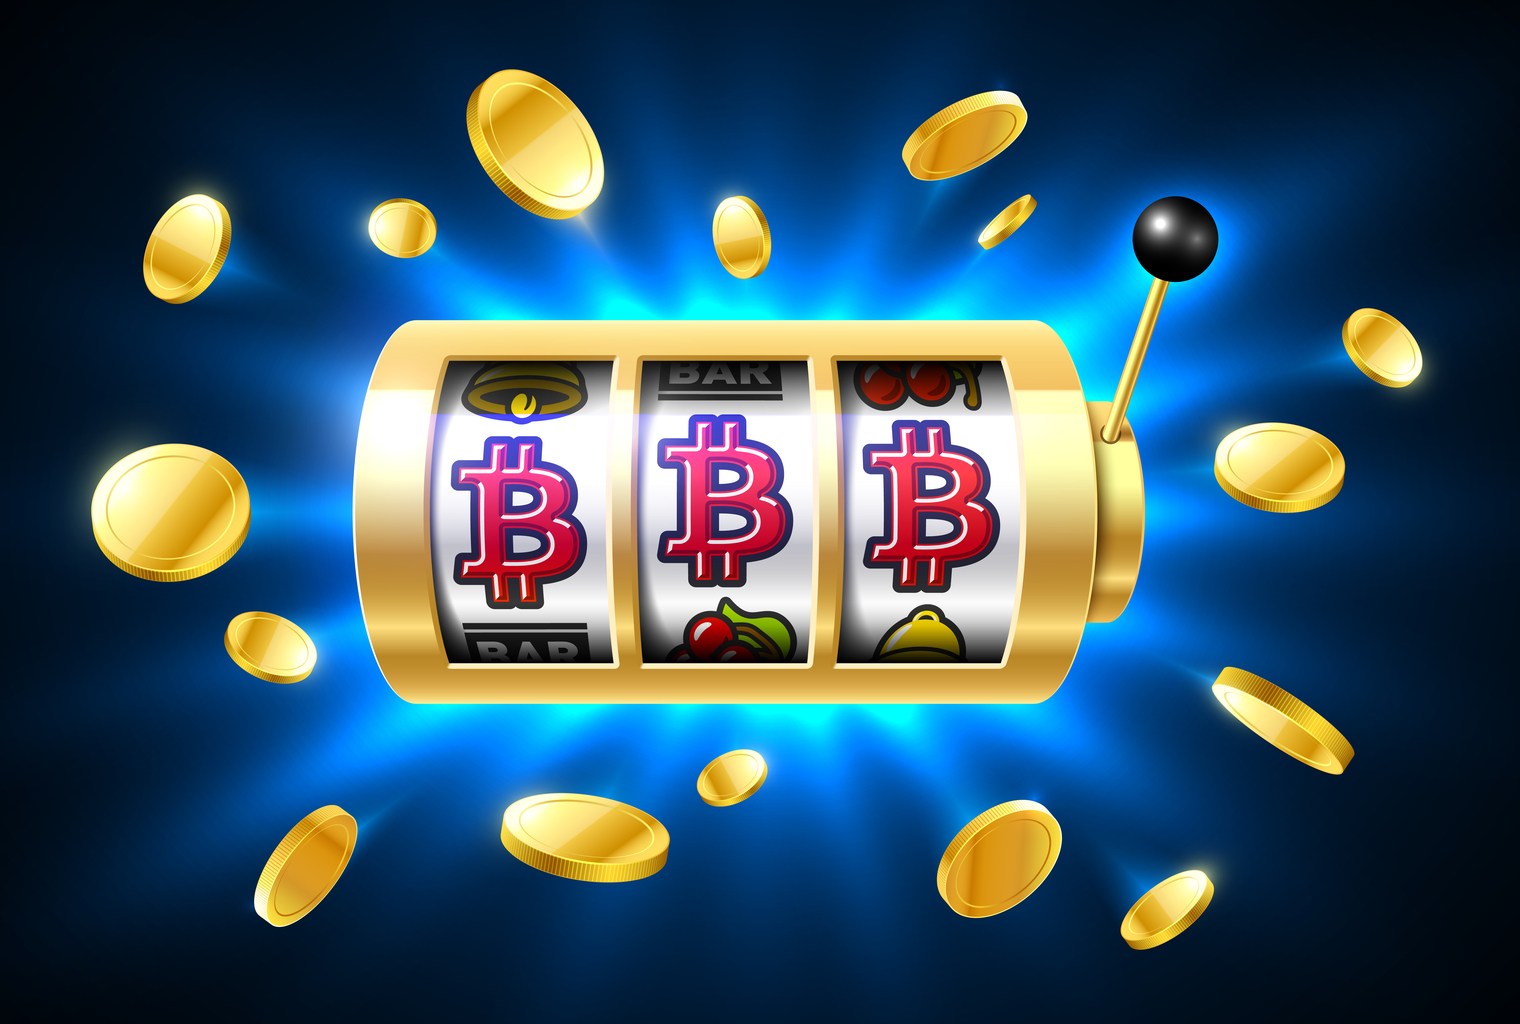 No deposit codes for ruby casino